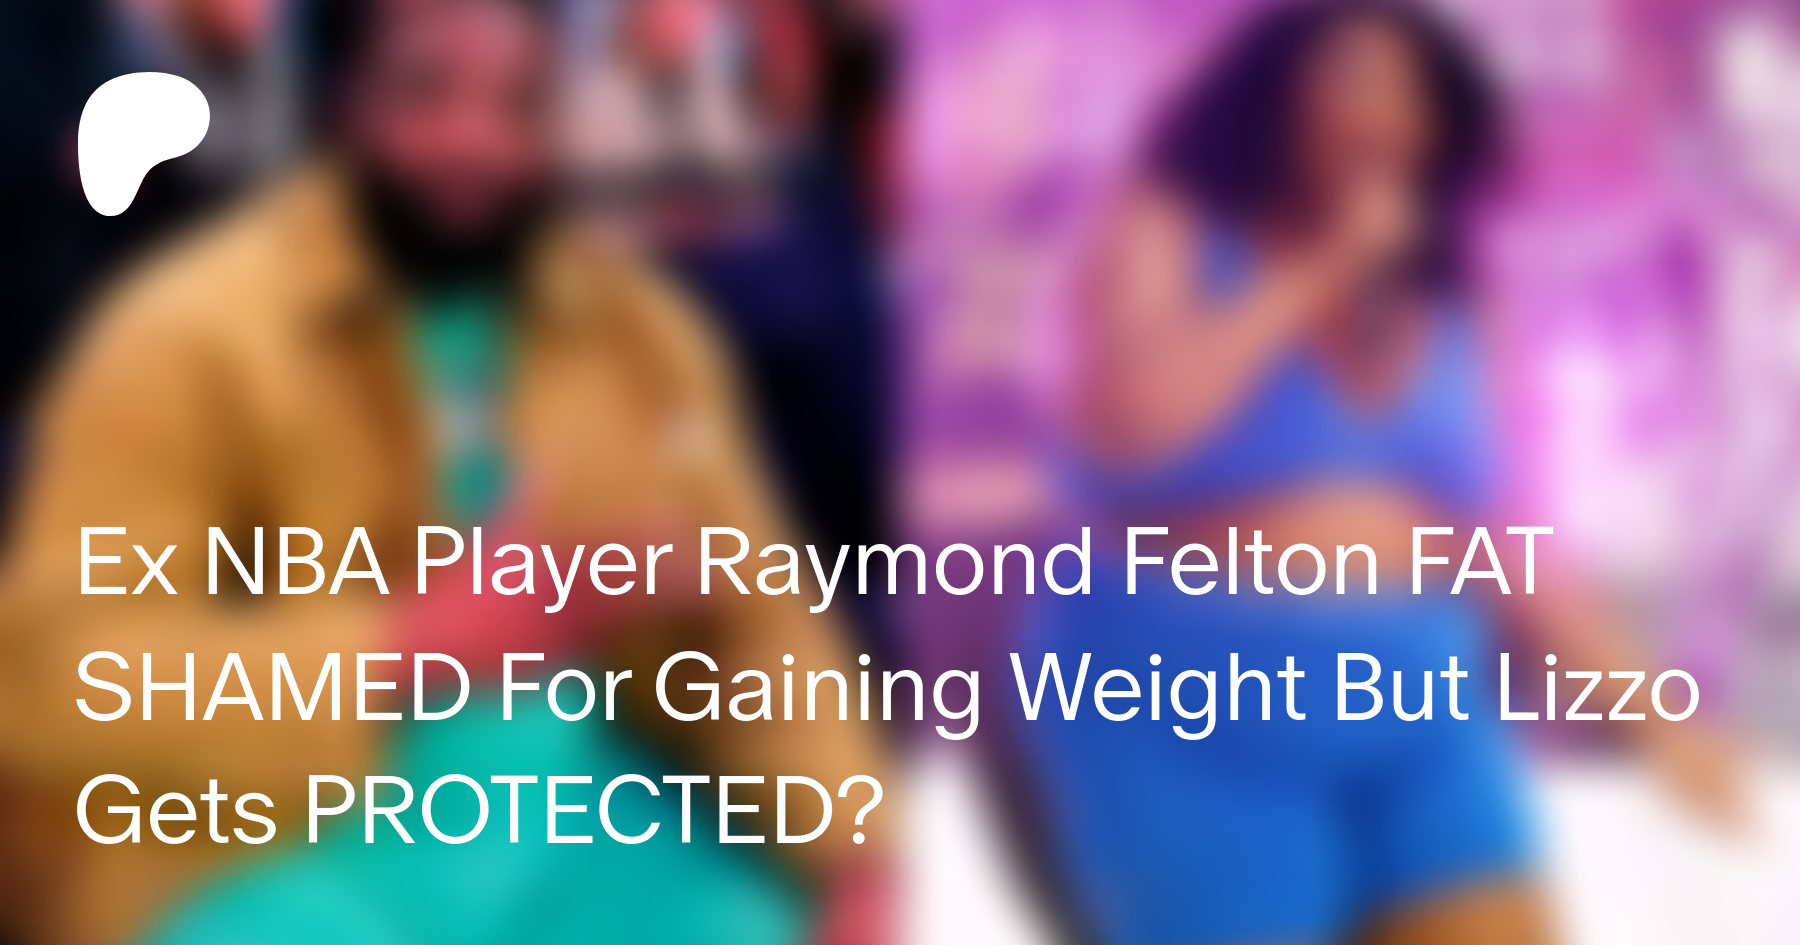 2014) Raymond Felton Is Tired of Being Called Fat : r/nba